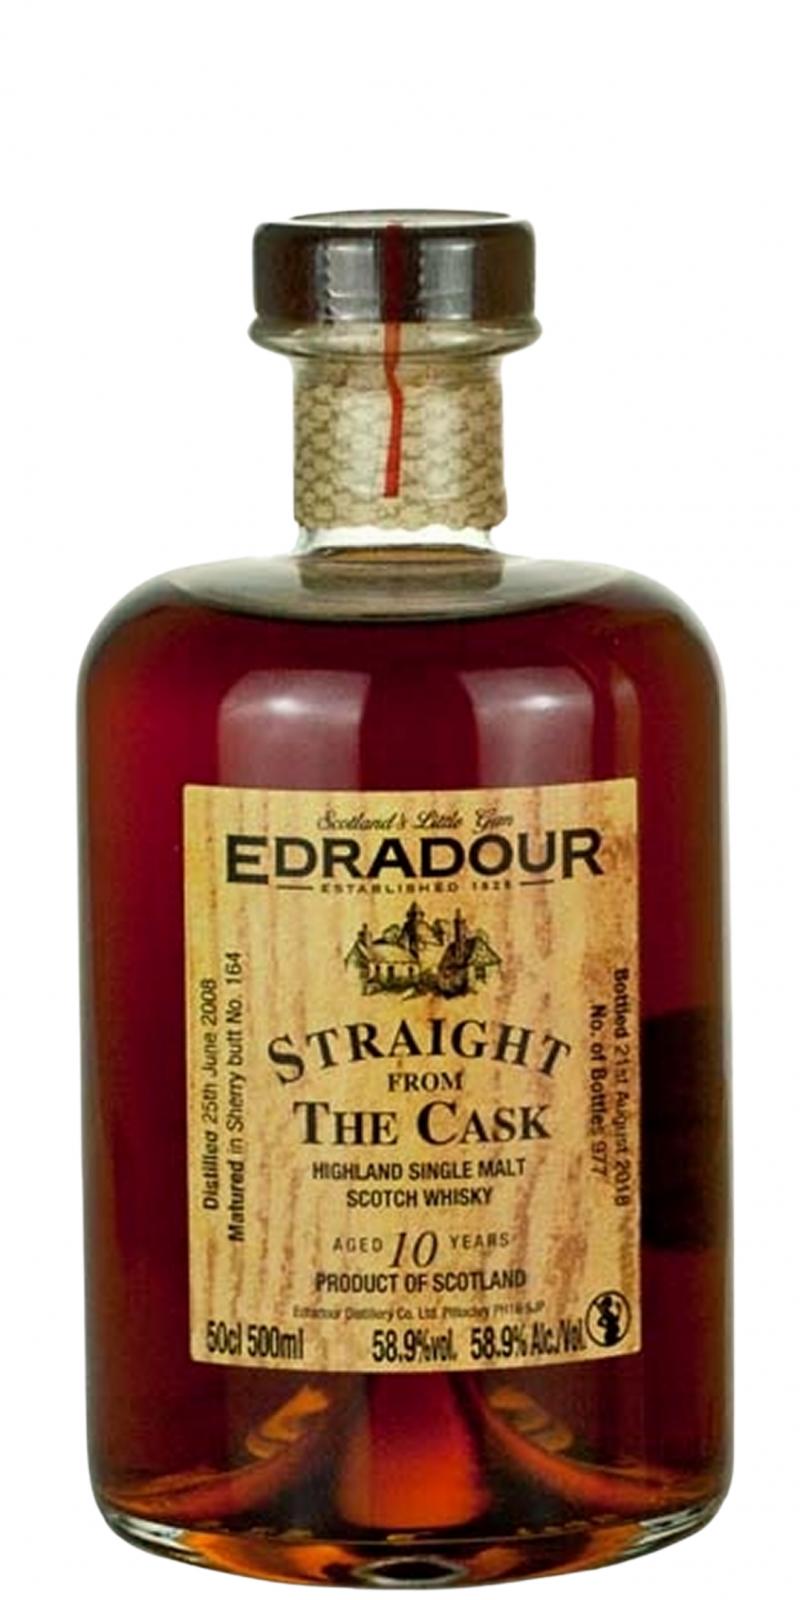 Edradour 1996 Straight From The Cask Sherry Cask Matured #164 58.1% 500ml